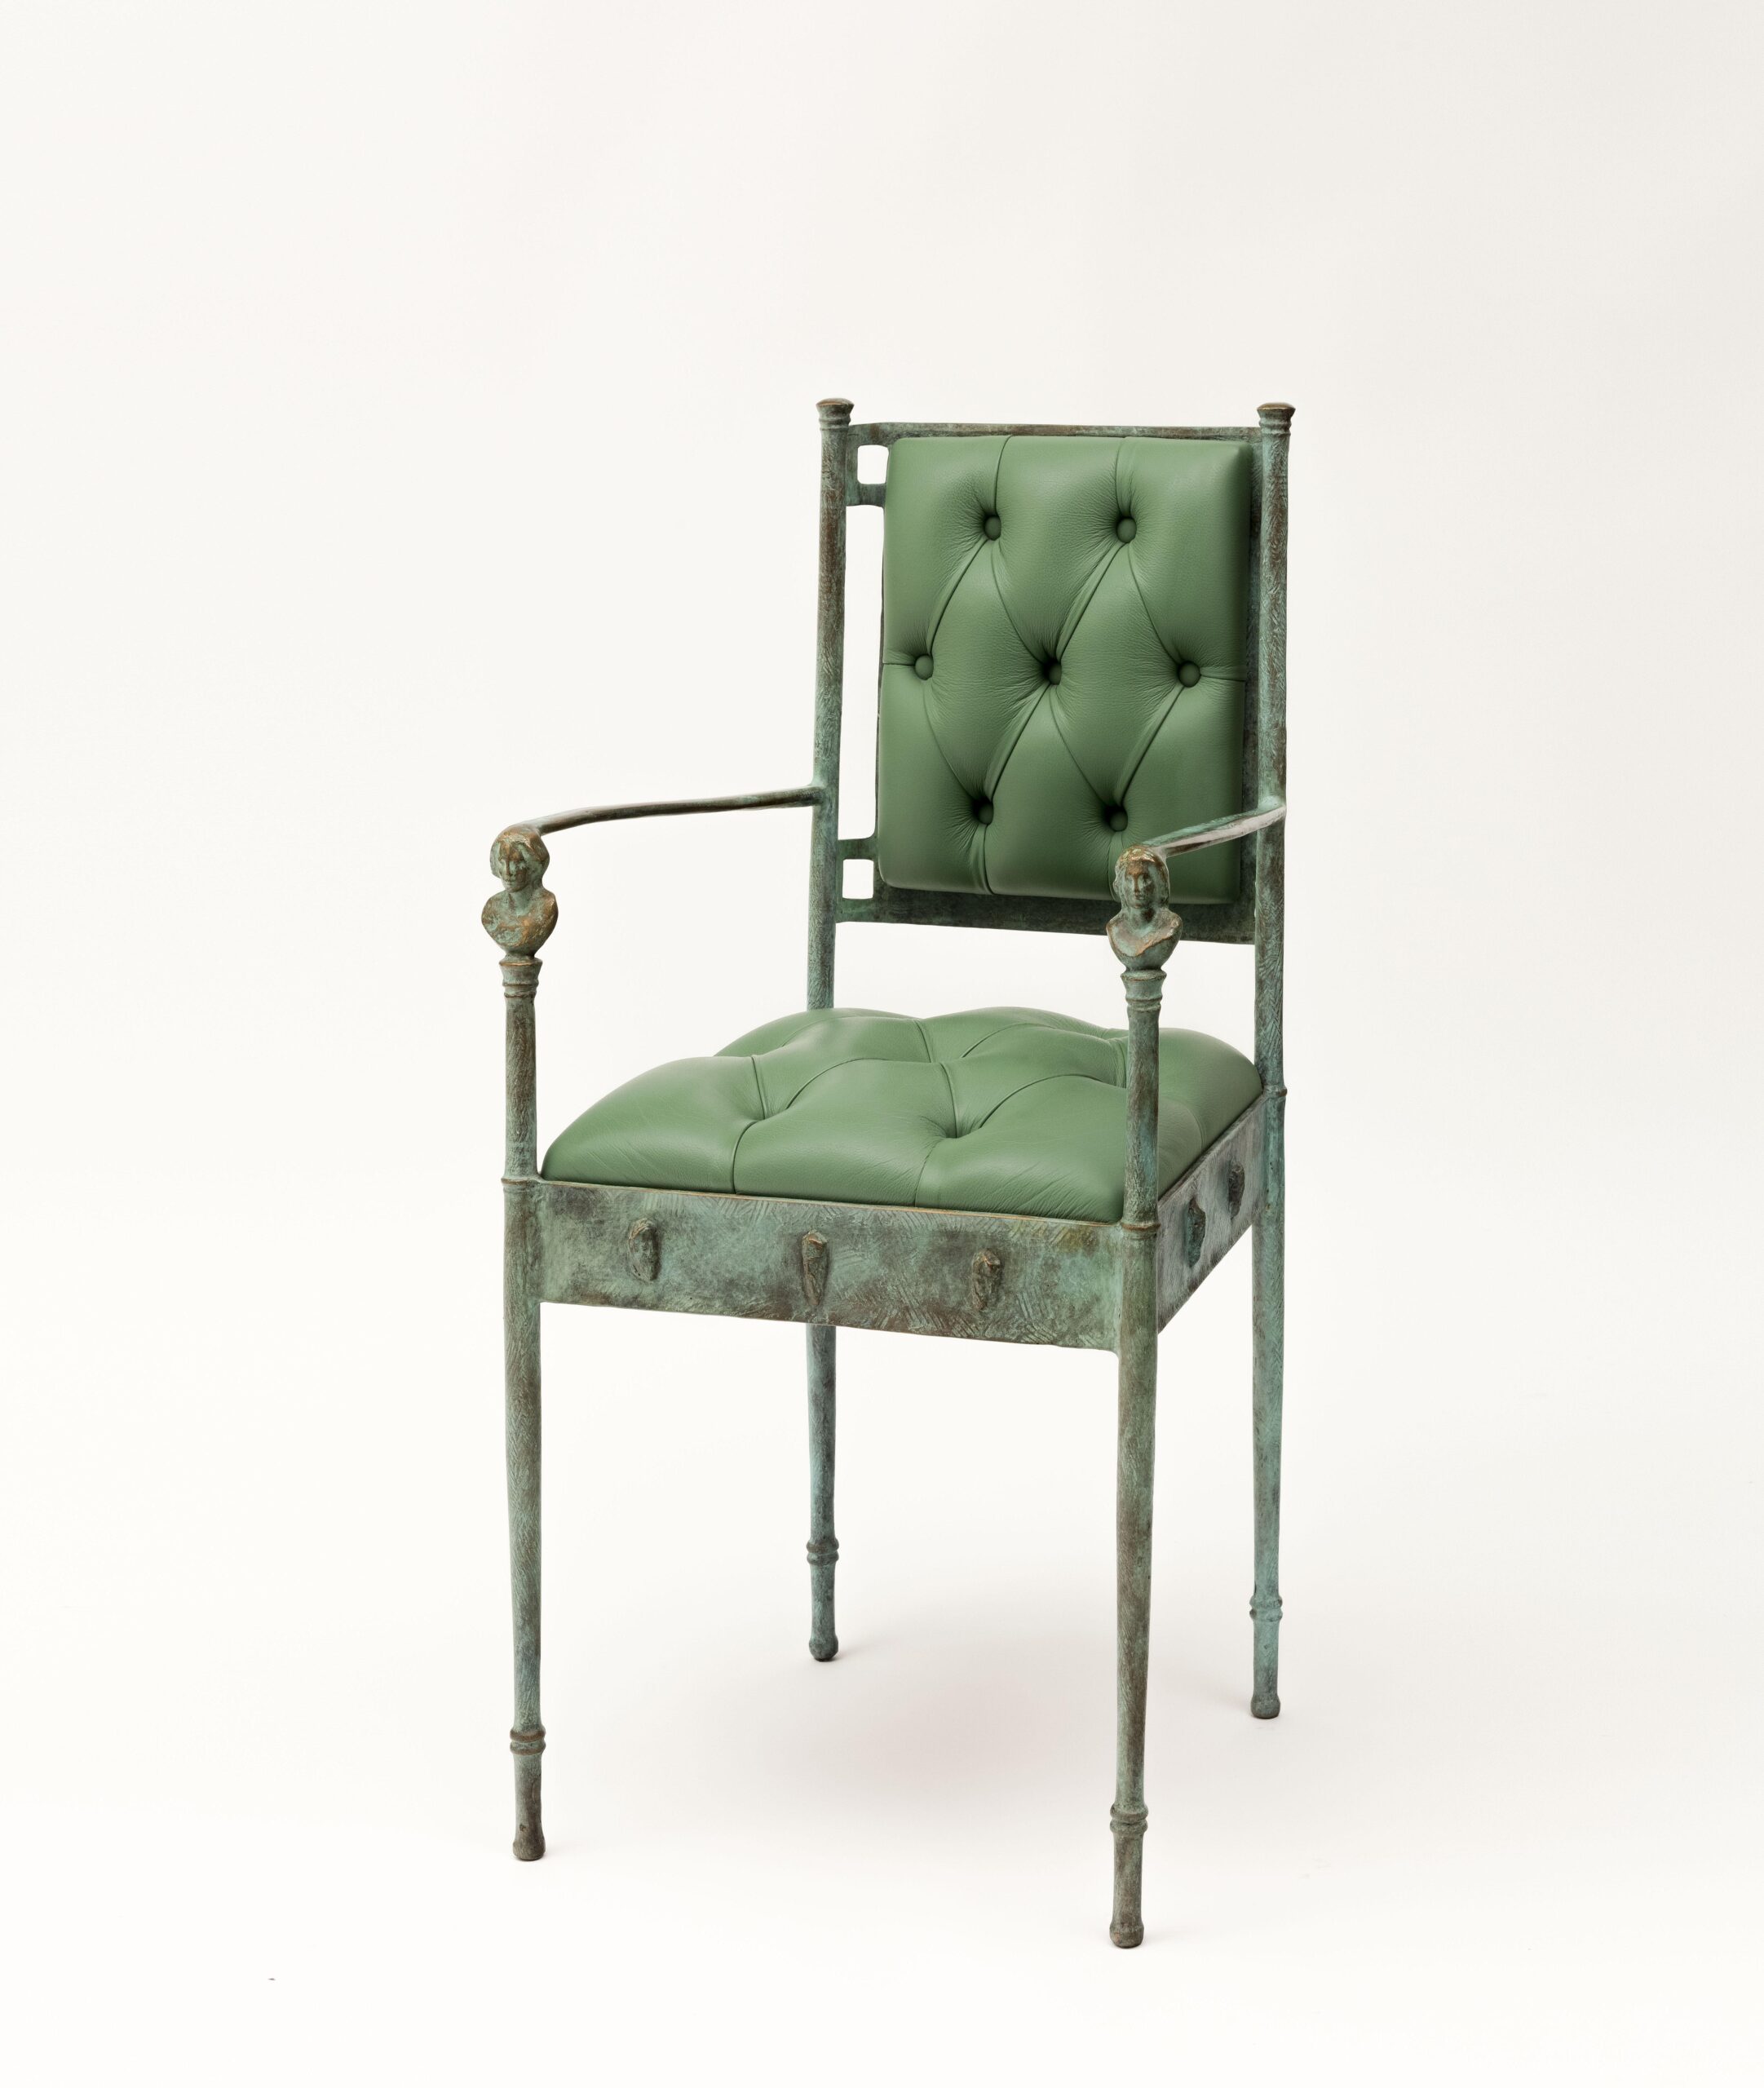 
							

									Giancarlo Biagi									Podesta (armchair) 2009									bronze and leather, 36 1/2 x 17 3/4 x 15 3/4 inches									


							